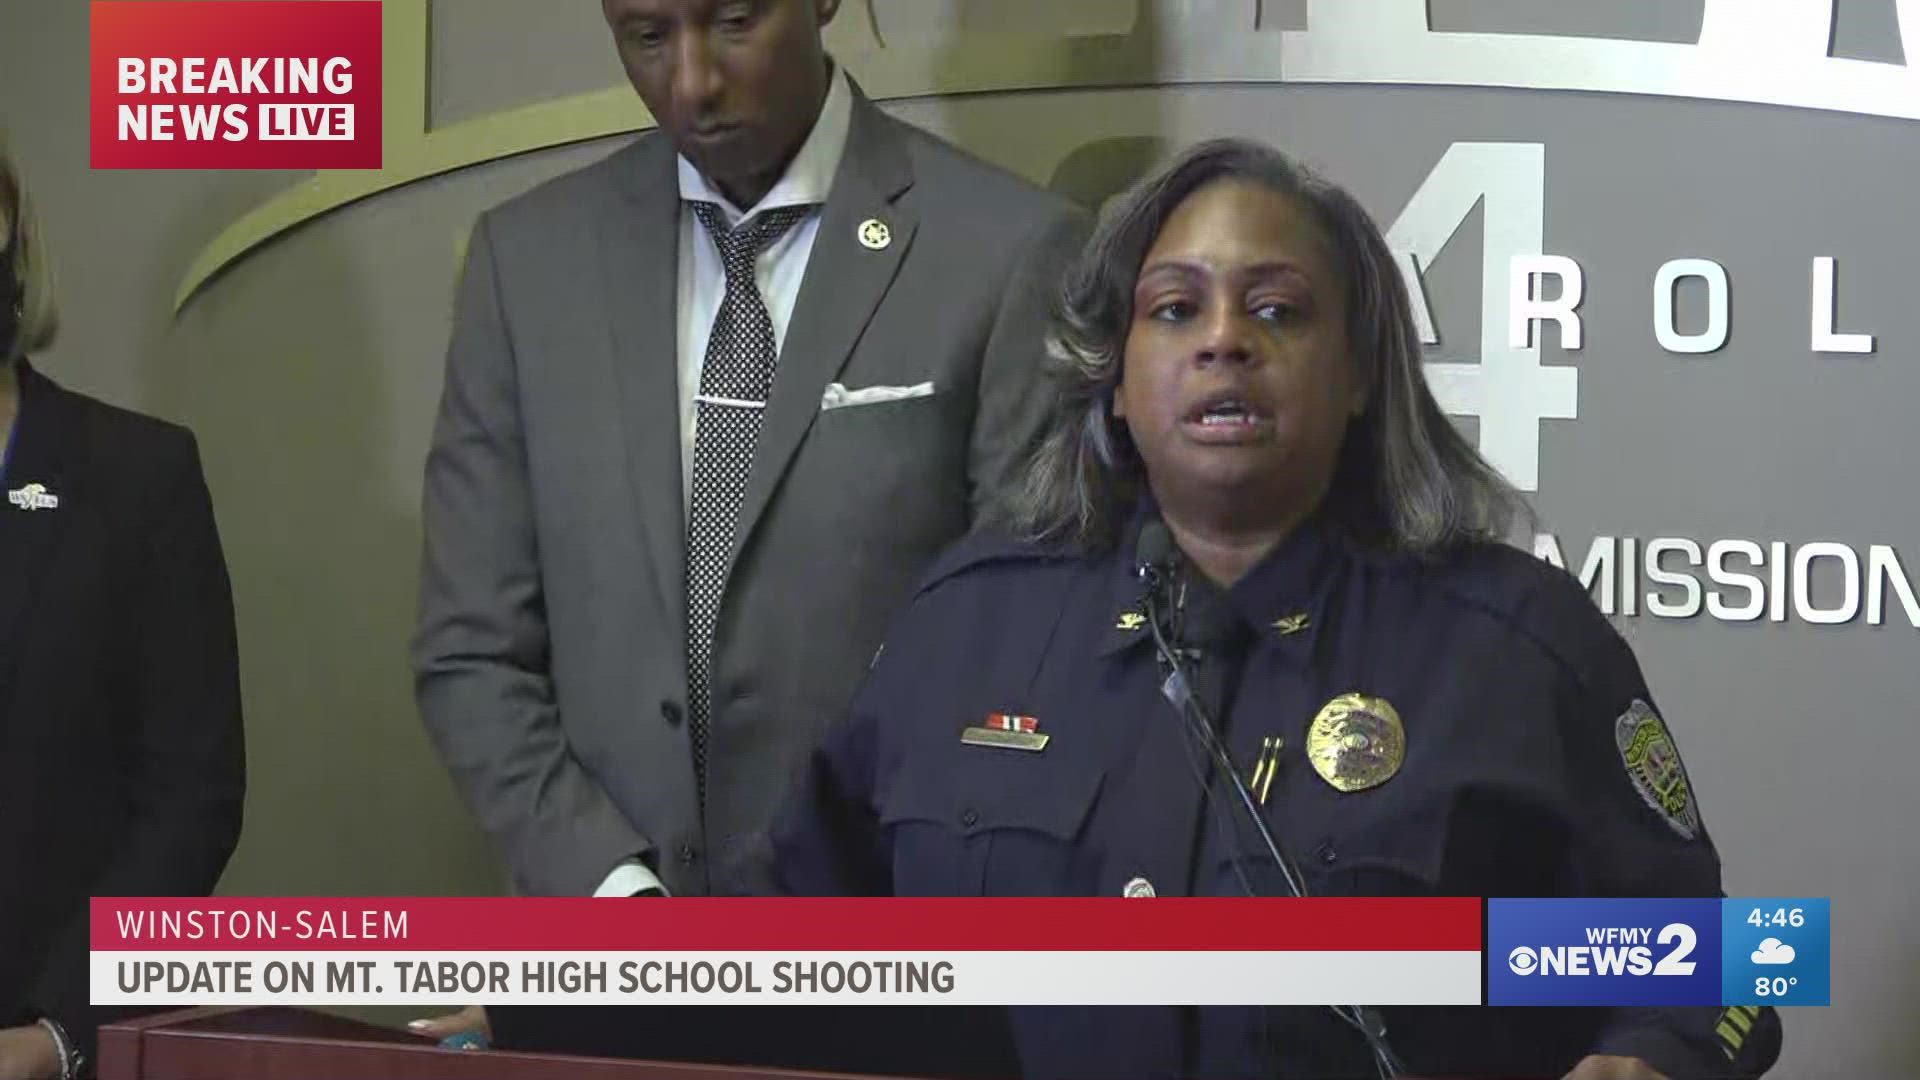 Mount Tabor High School student, William Miller Jr. died after another student shot him Wednesday on campus, Winston-Salem Police Chief Catrina Thompson said.